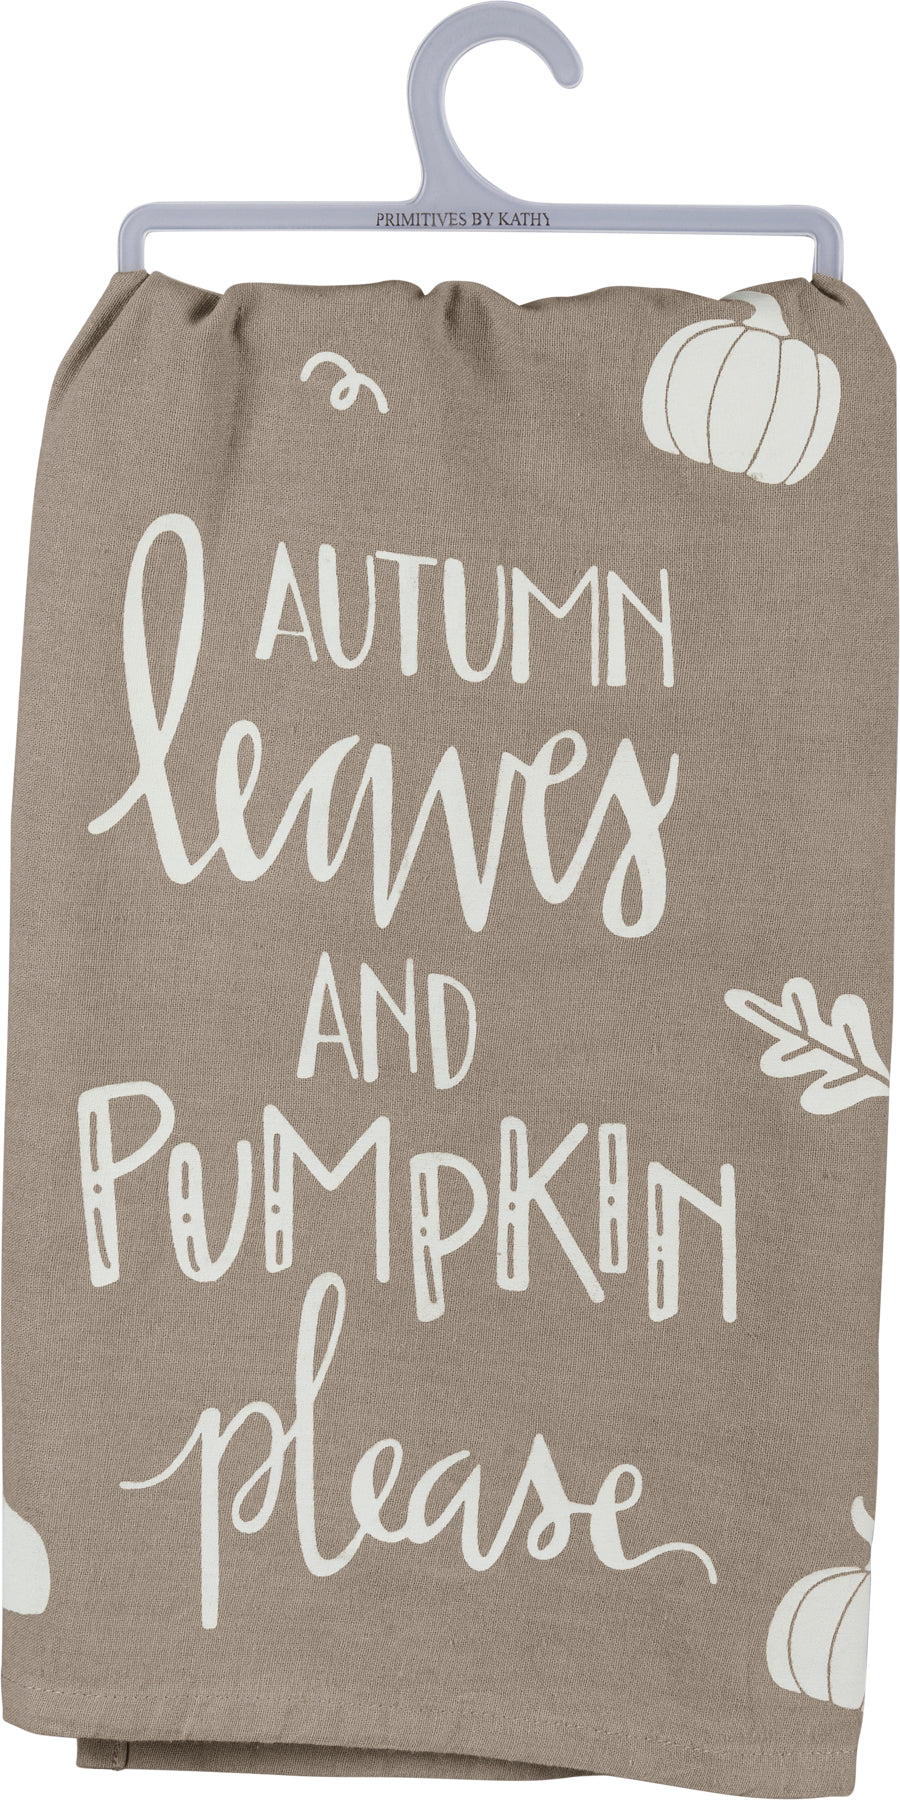 Kitchen Towel - Autumn Leaves And Pumpkin Please